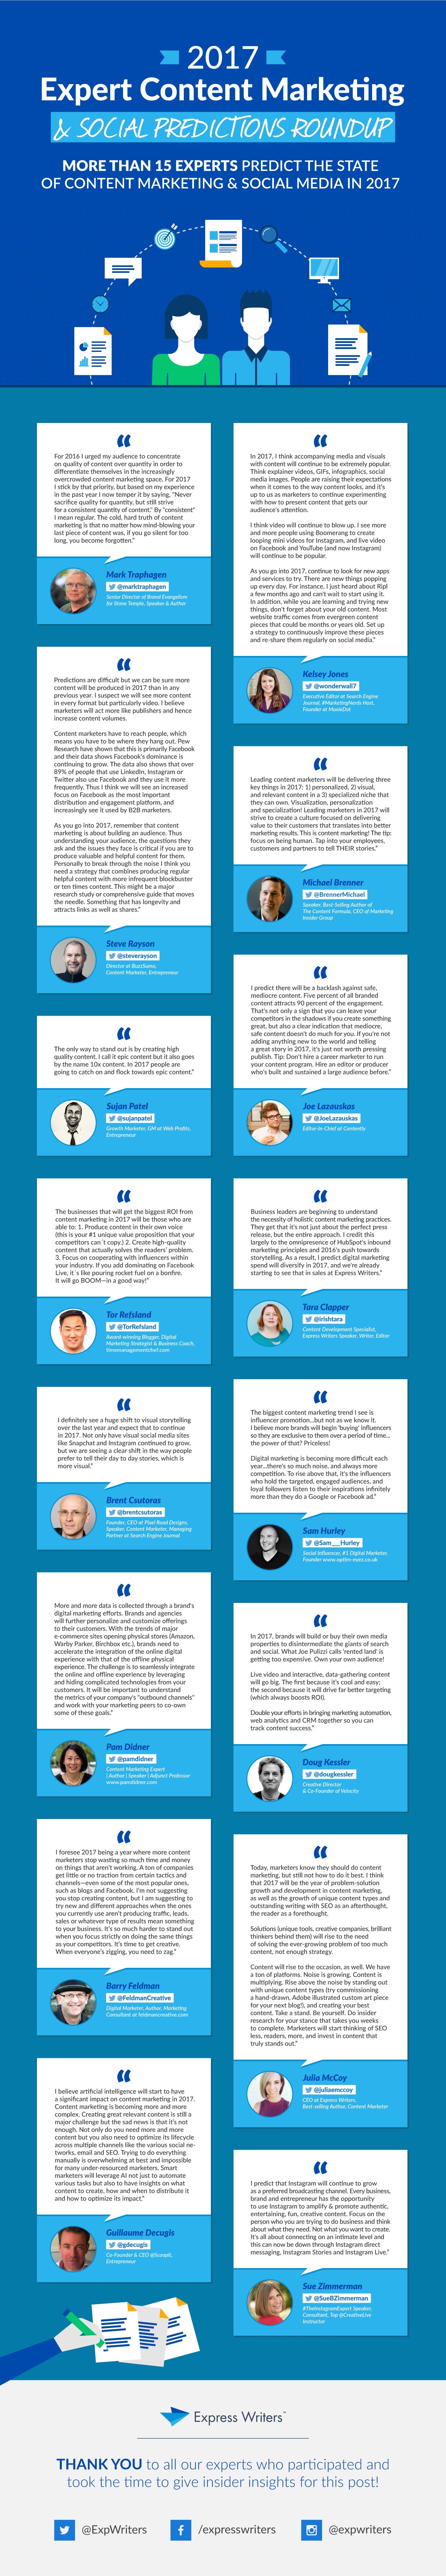 2017 Expert Predictions Roundup: More Than 15 Experts Predict the State of Content Marketing & Social Media [Infographic]